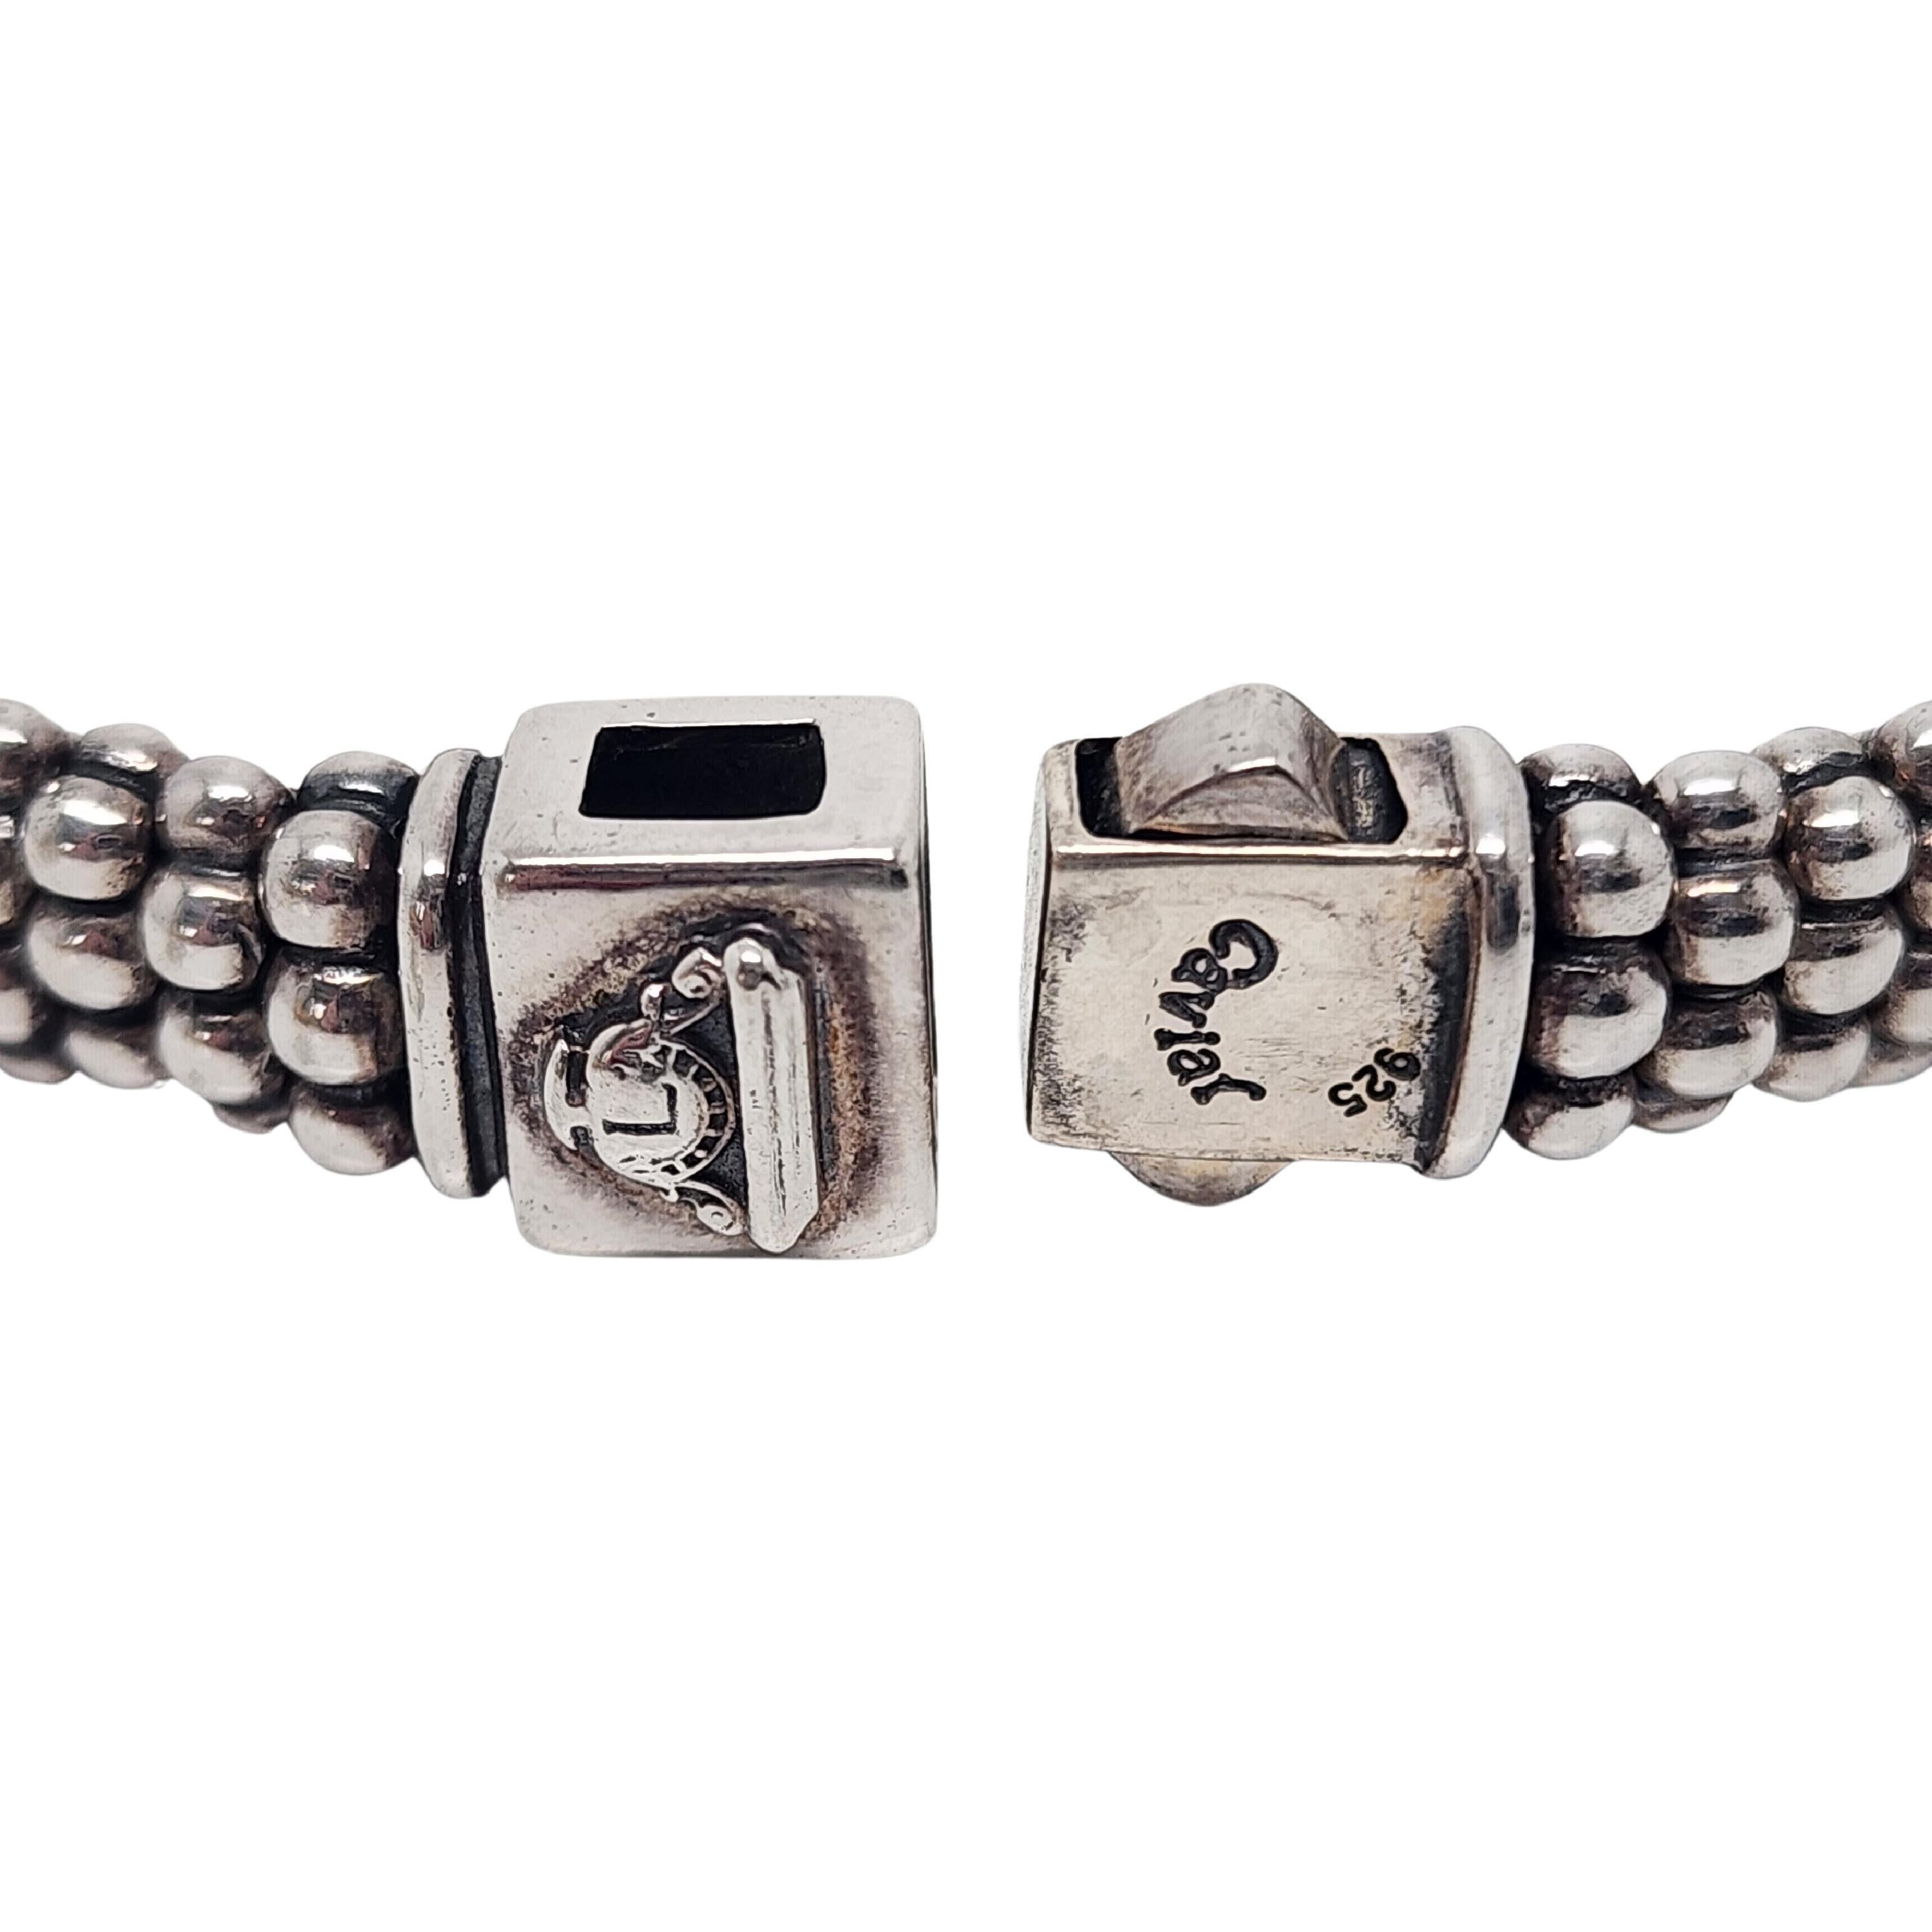 Lagos Caviar Sterling Silver Derby Buckle Bracelet #16271 In Good Condition For Sale In Washington Depot, CT